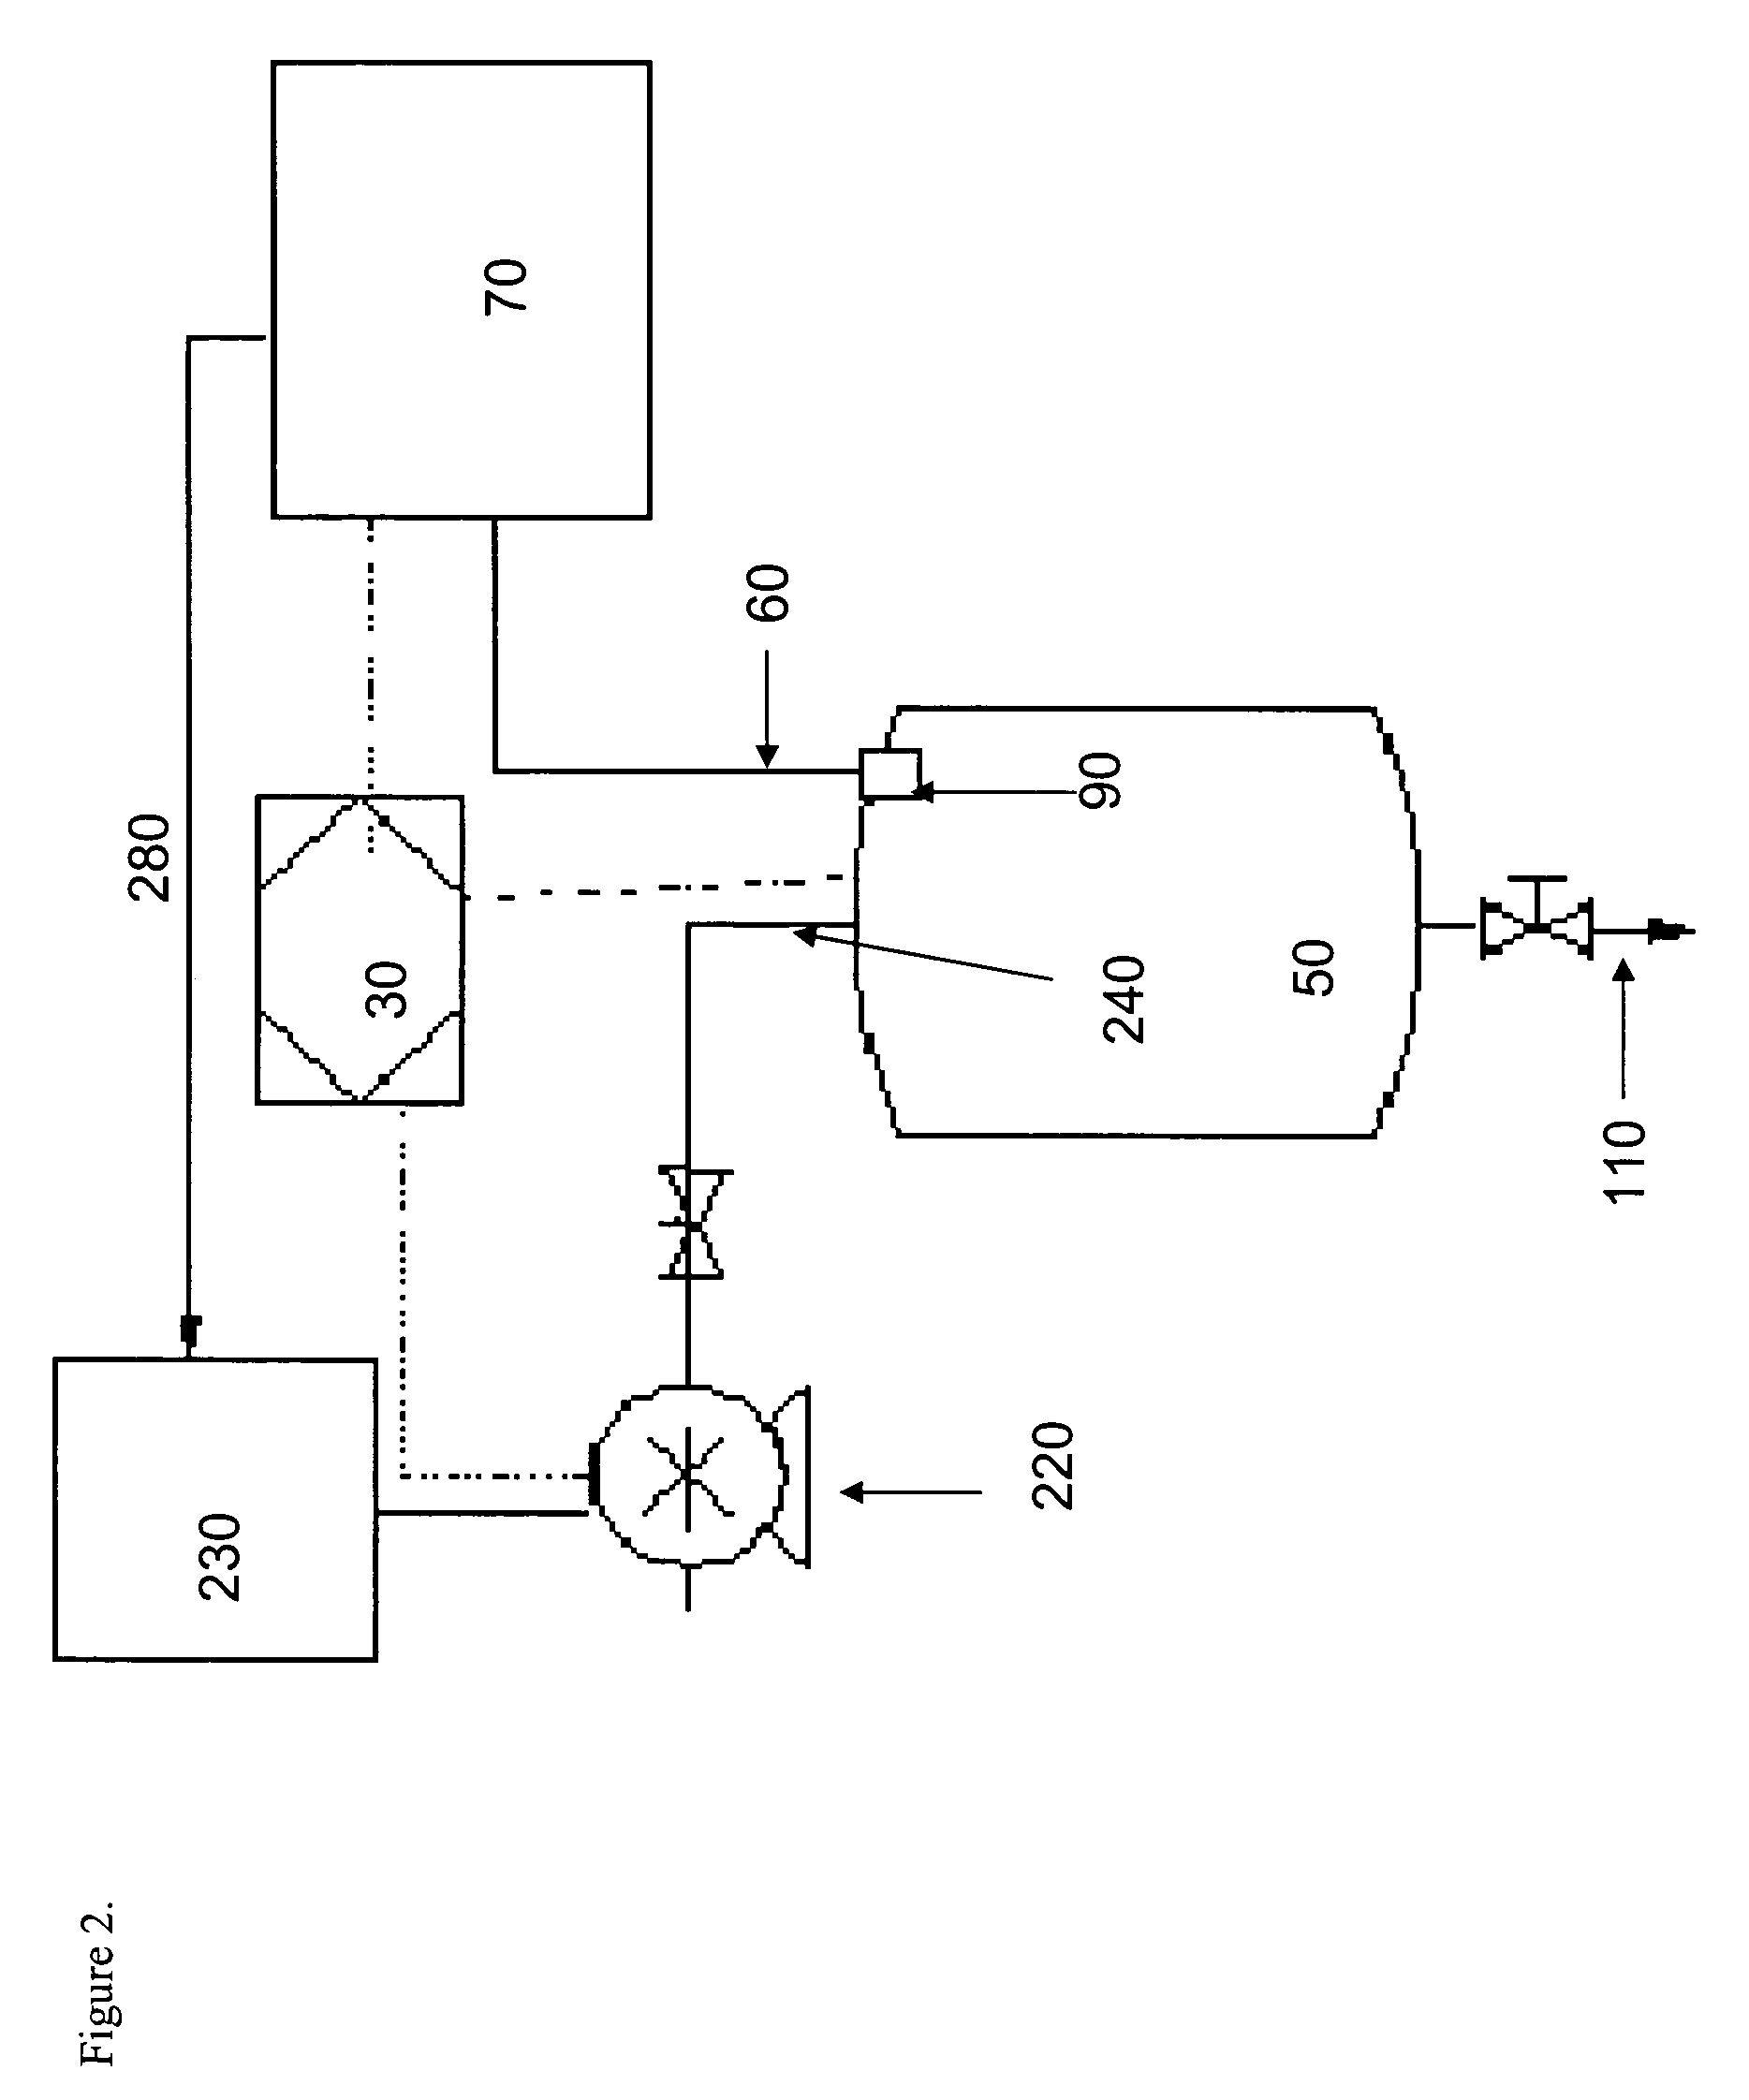 Methods and devices for hydrogen generation from solid hydrides